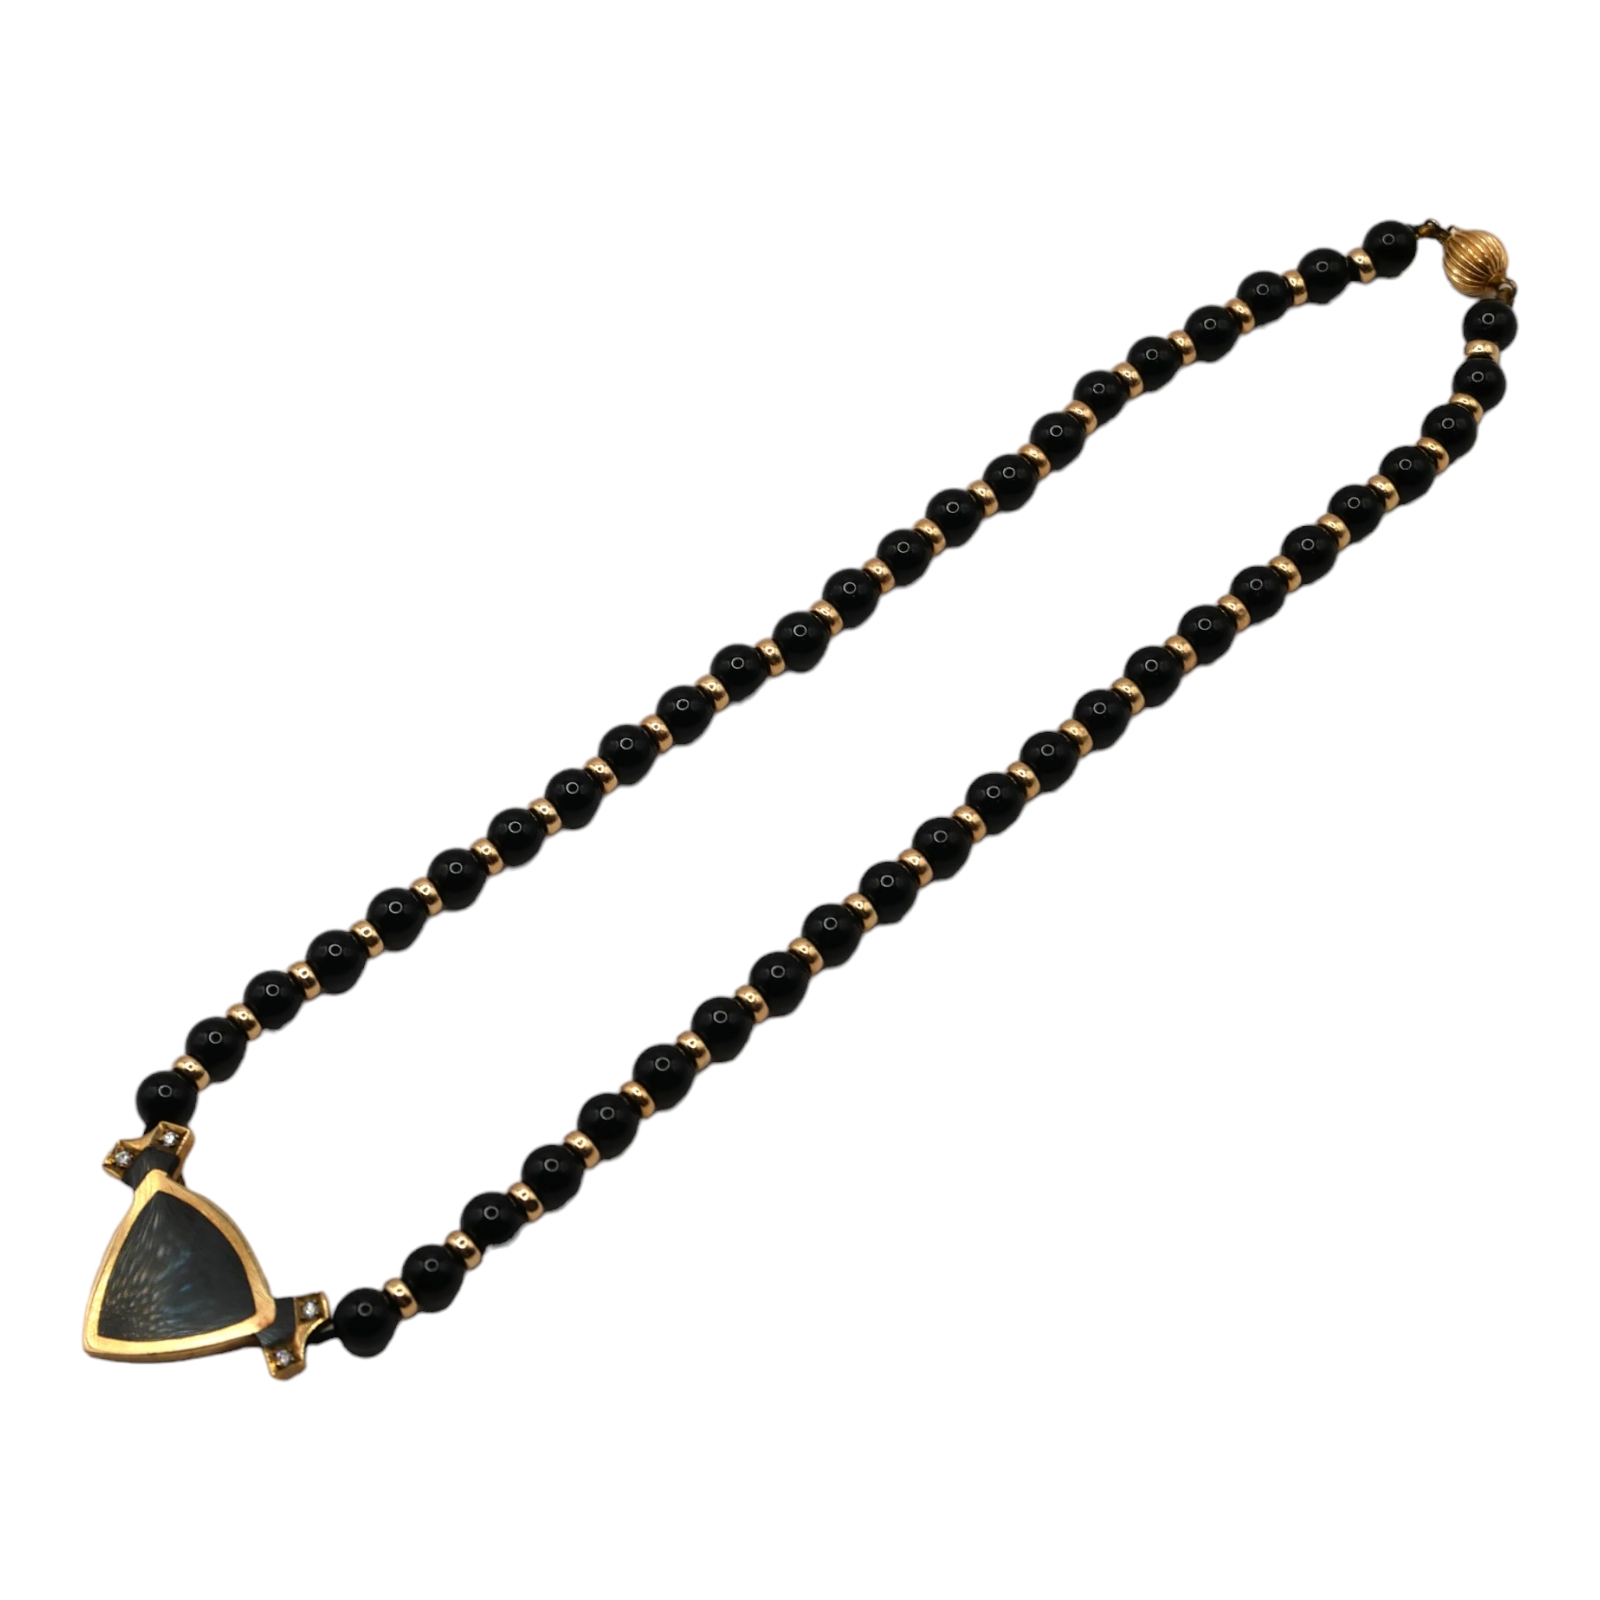 A VINTAGE DESIGNER STYLE 9CT GOLD, ONYX AND DIAMOND NECKLACE Having 14ct gold textured ball clasp,